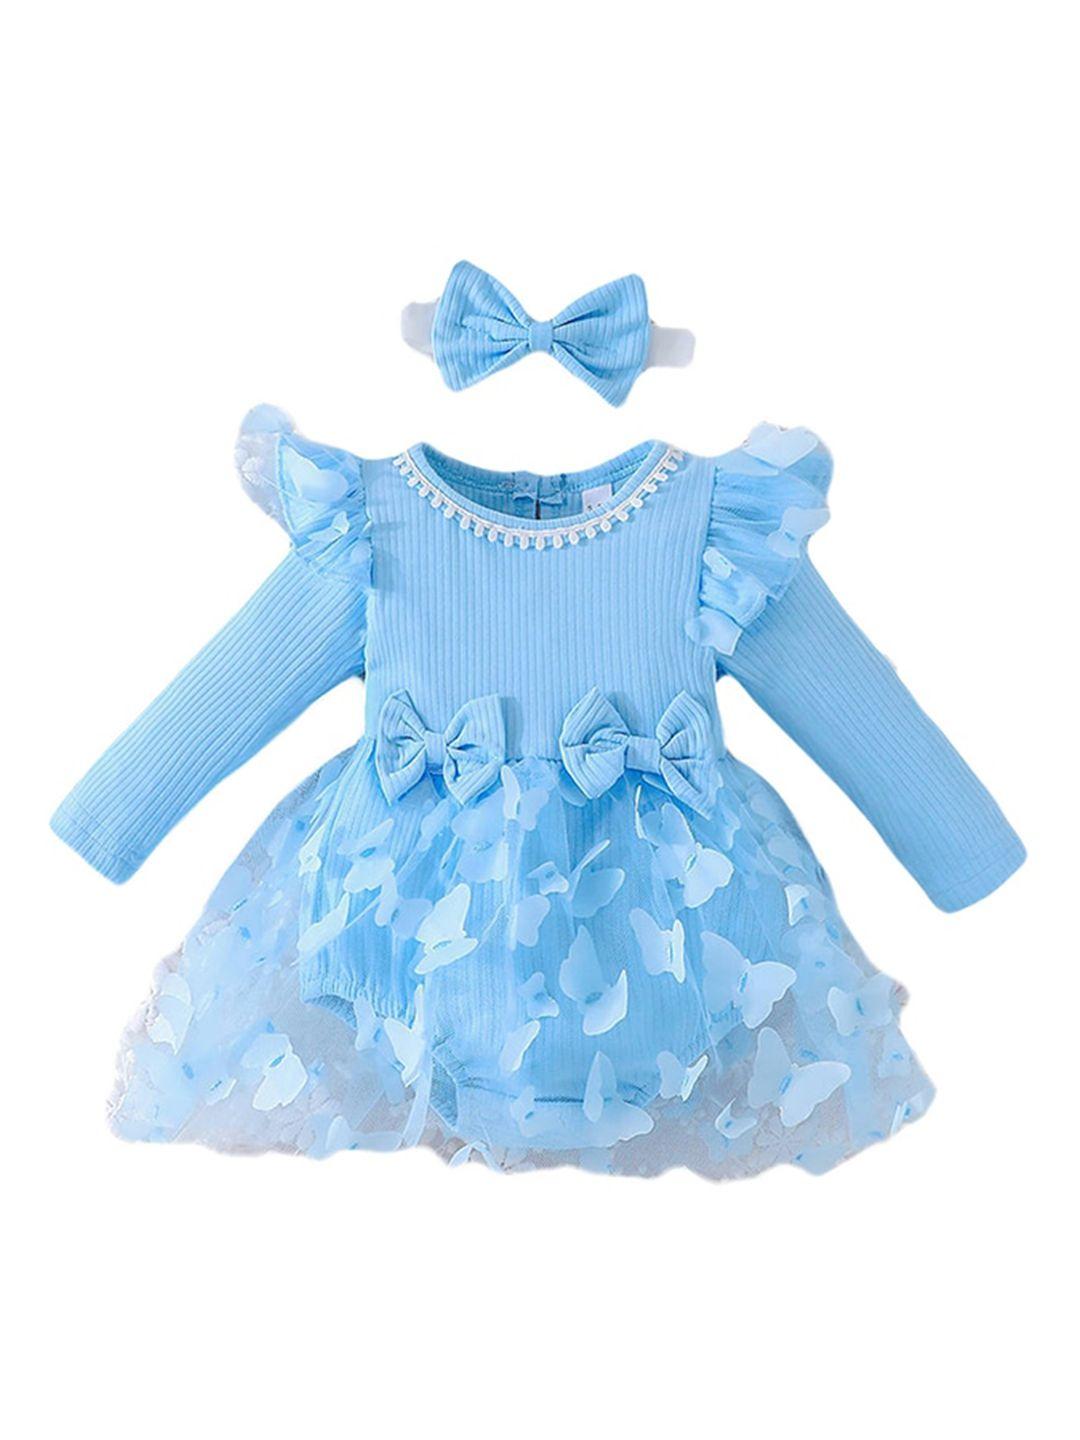 stylecast infant girls cotton rompers with bow band